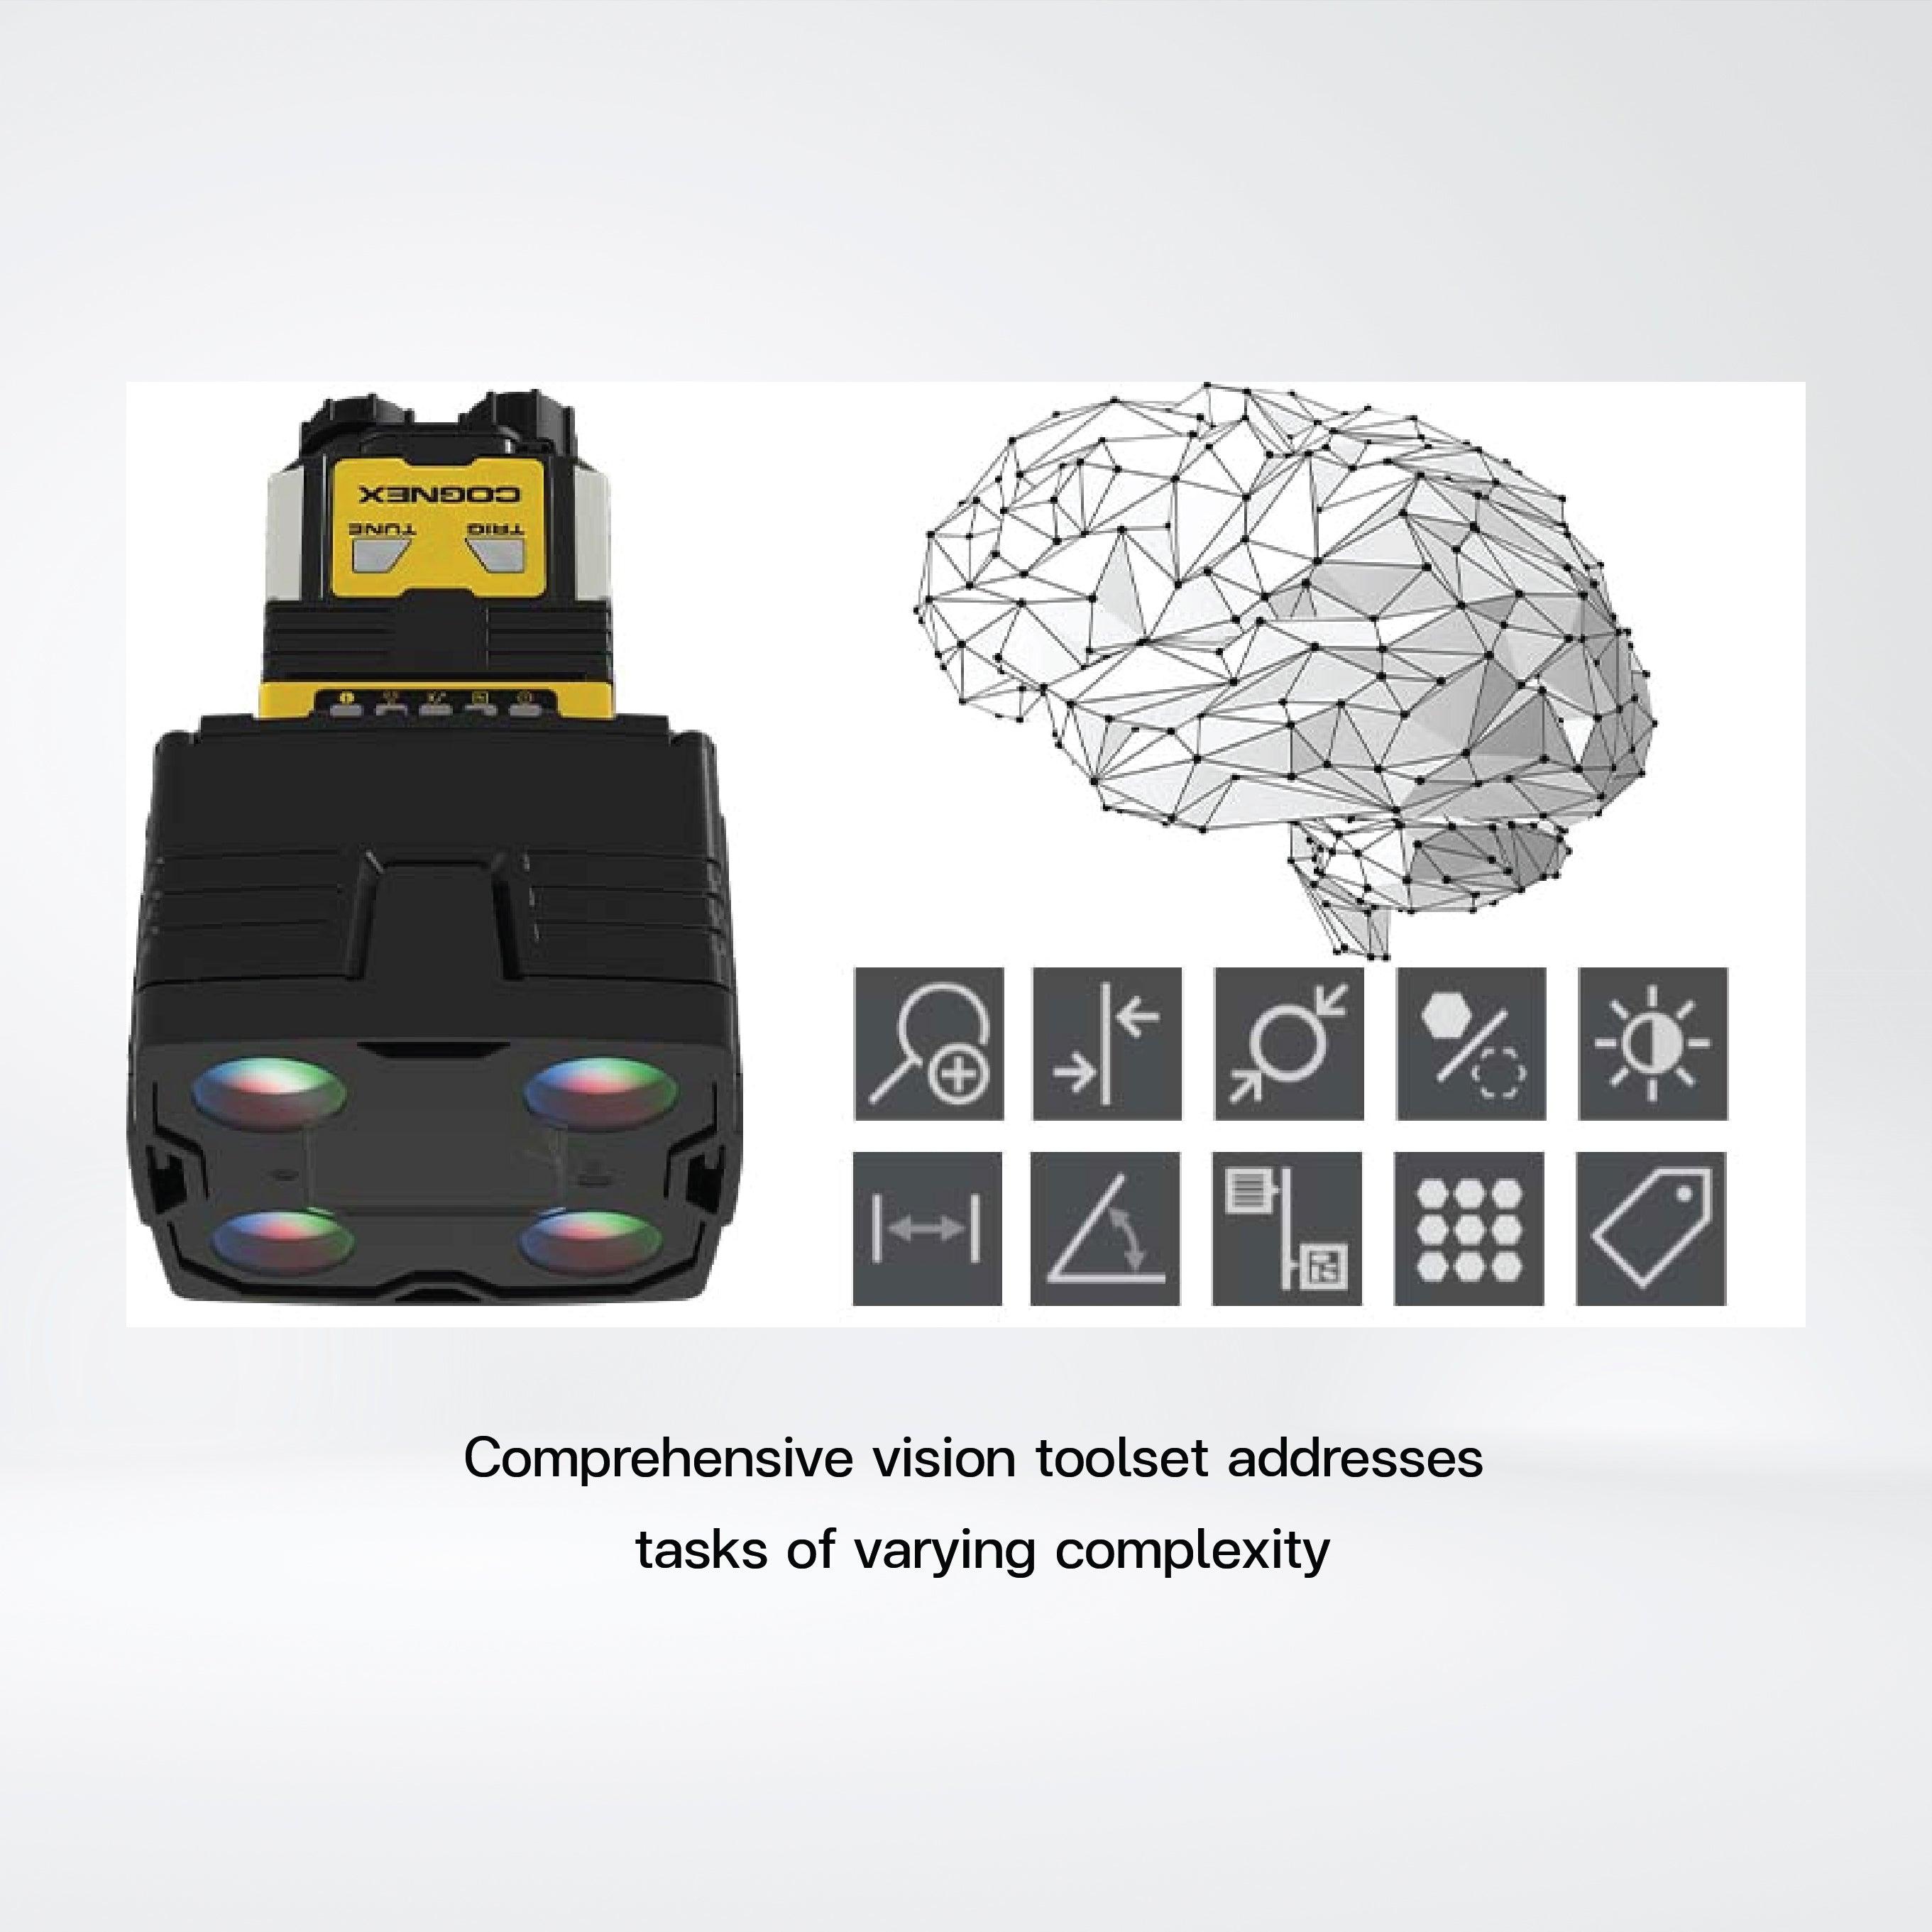 In-Sight 2800 vision system Automate error detection in minutes – no experience required - Riverplus